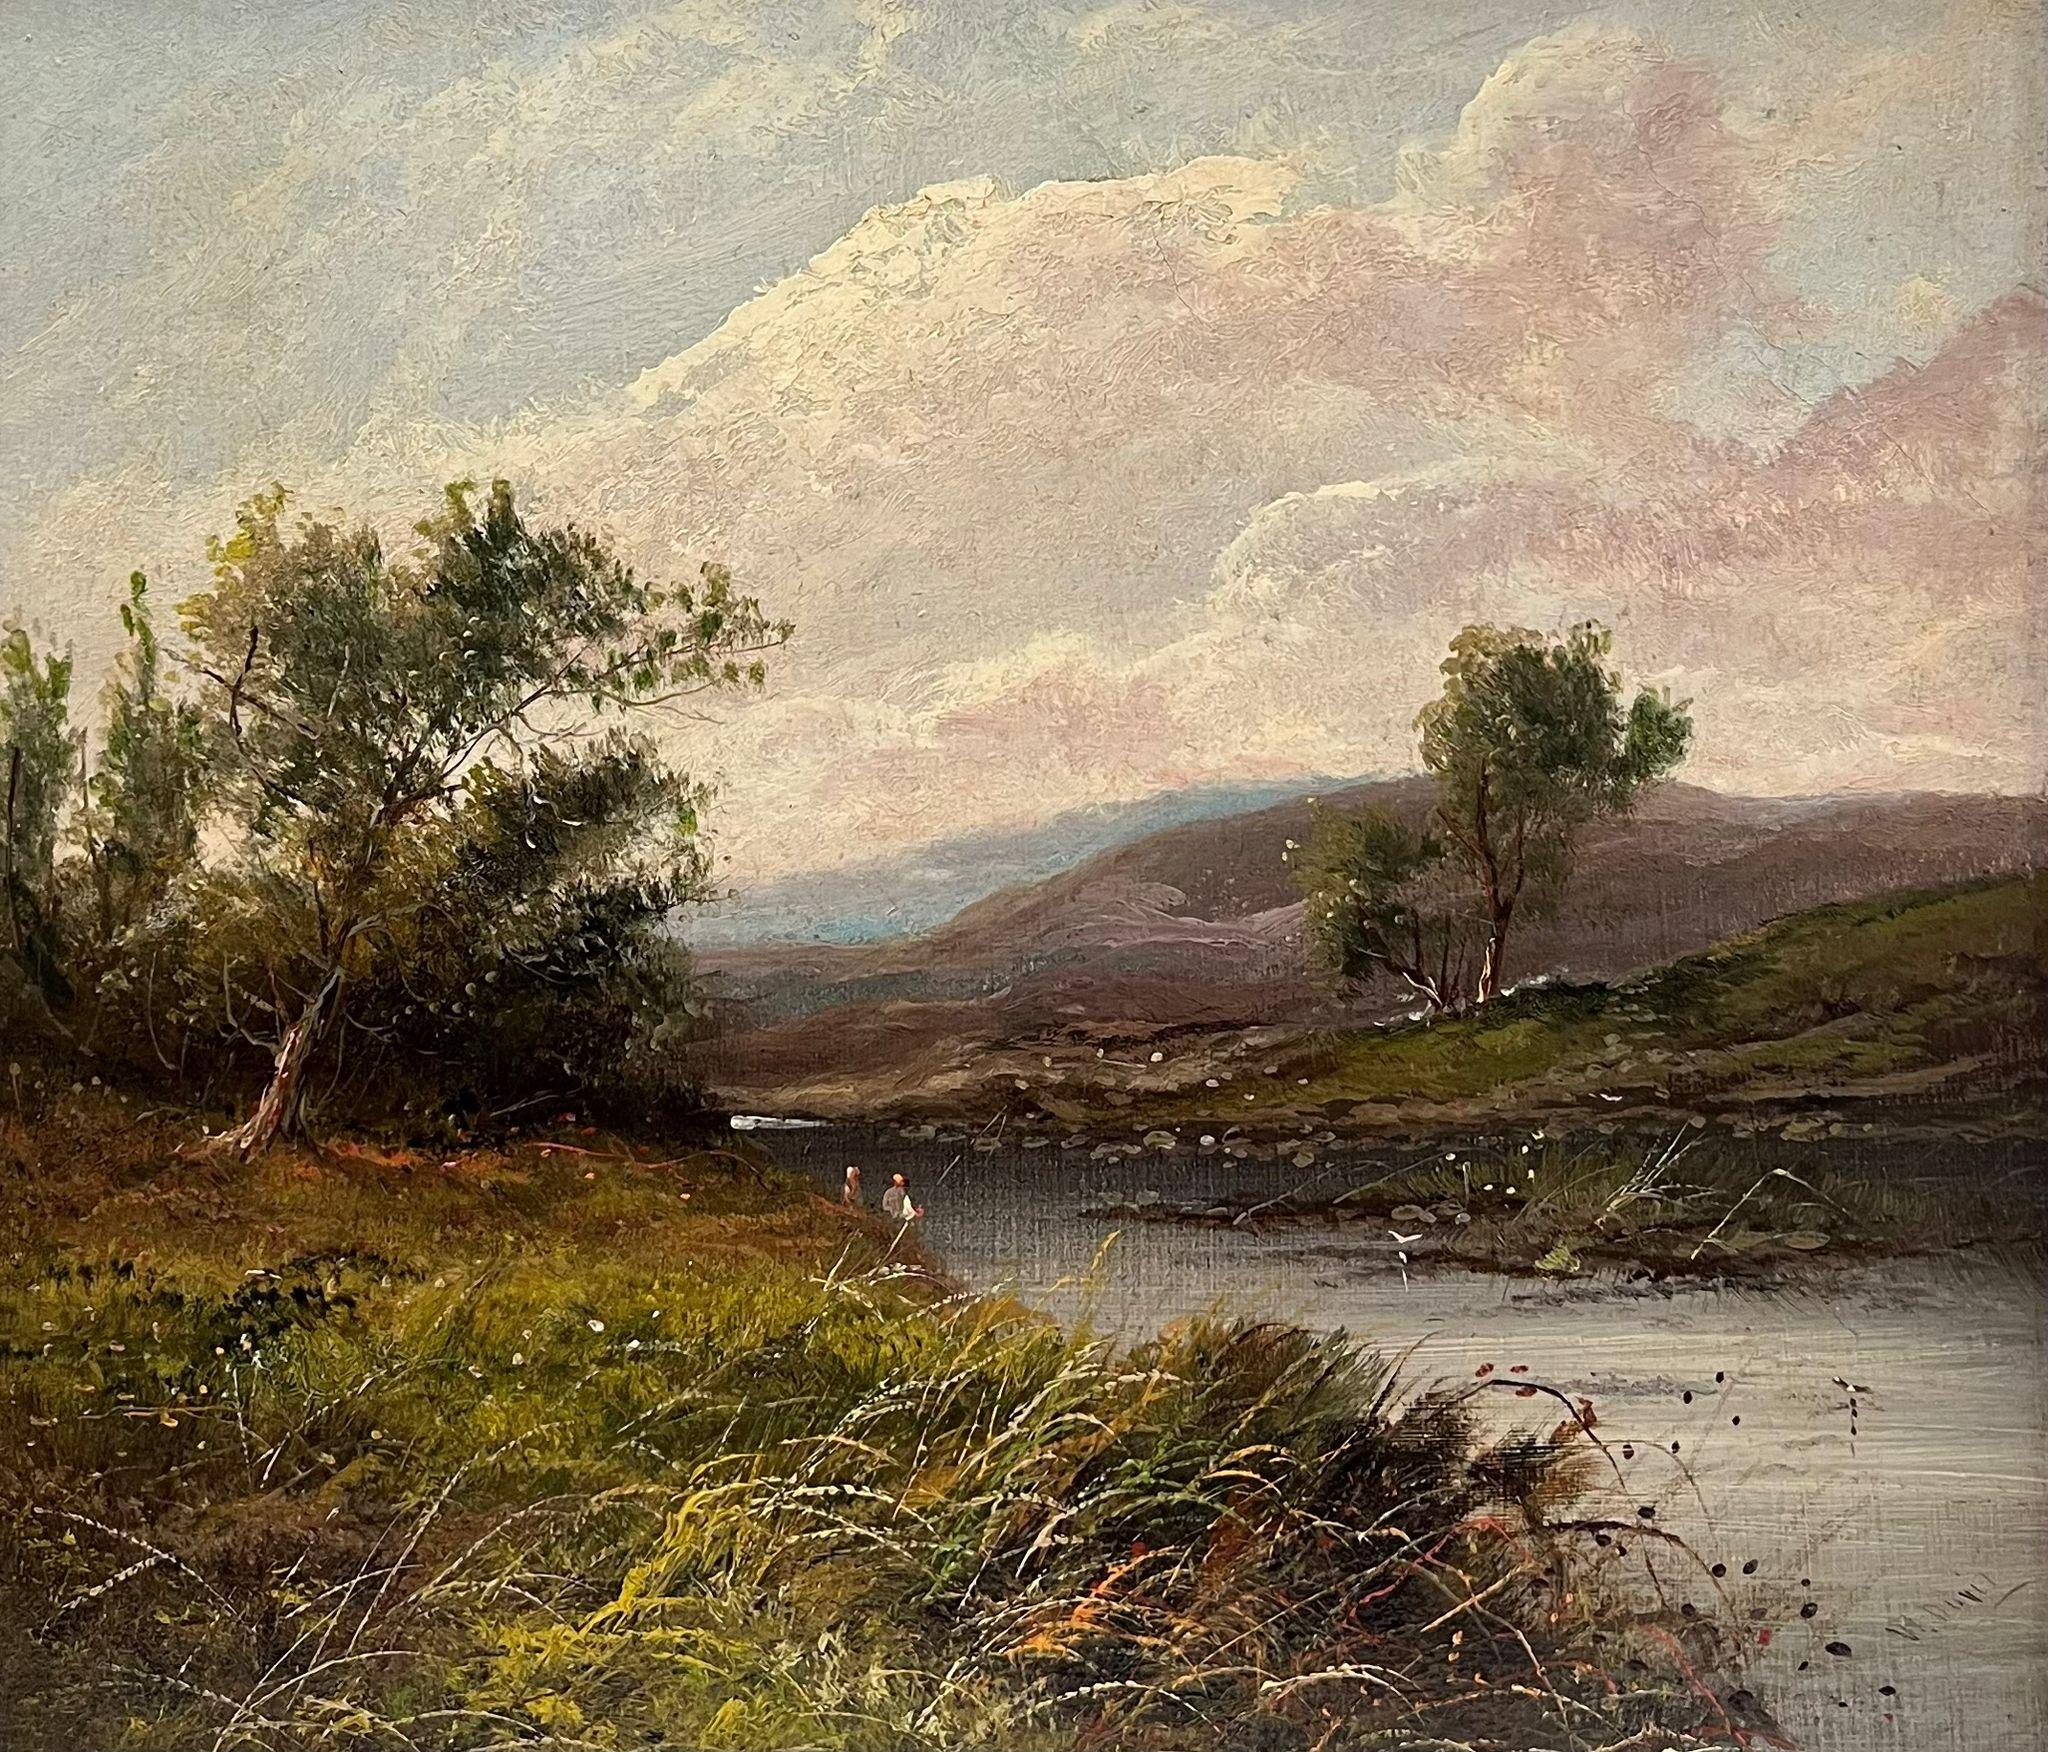 A Quiet Day on the River
British School, 19th century
oil on board, framed
framed: 15.5 x 17 inches
board: 12 x 13.5 inches
provenance: private collection, UK
condition: very good and sound condition 